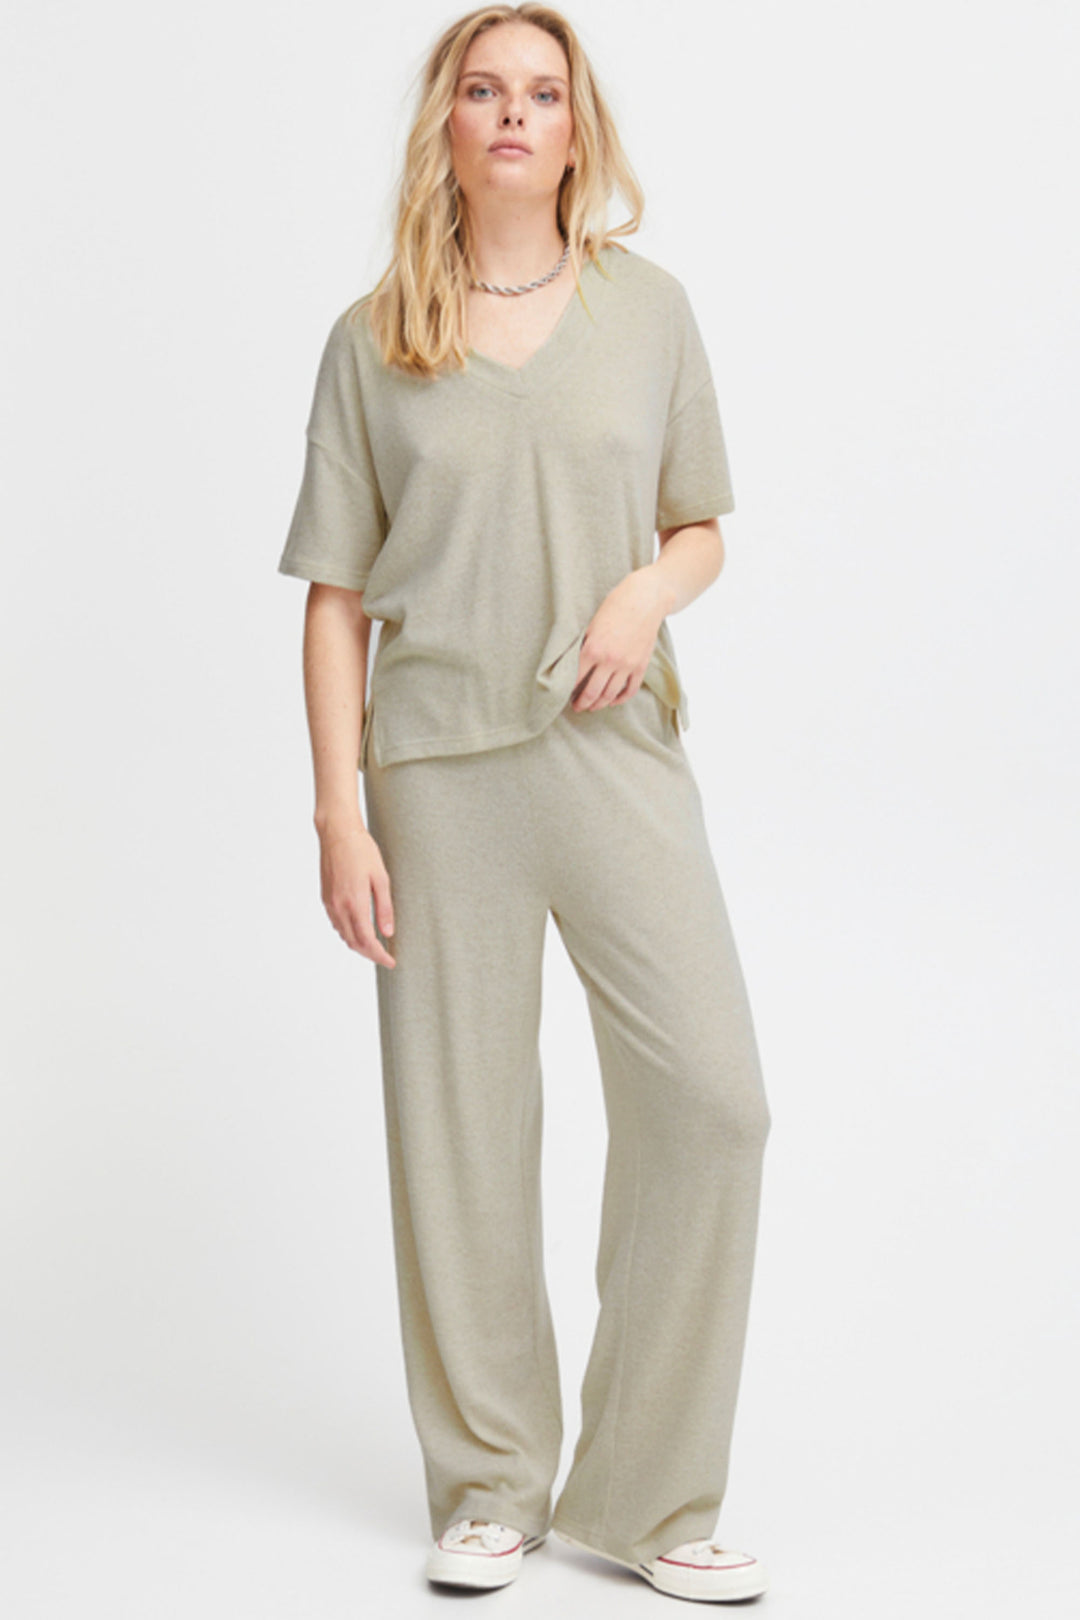 These Knit Pants combine soft and stretchy fabric with a lightweight design, making them perfect for everyday loungewear.